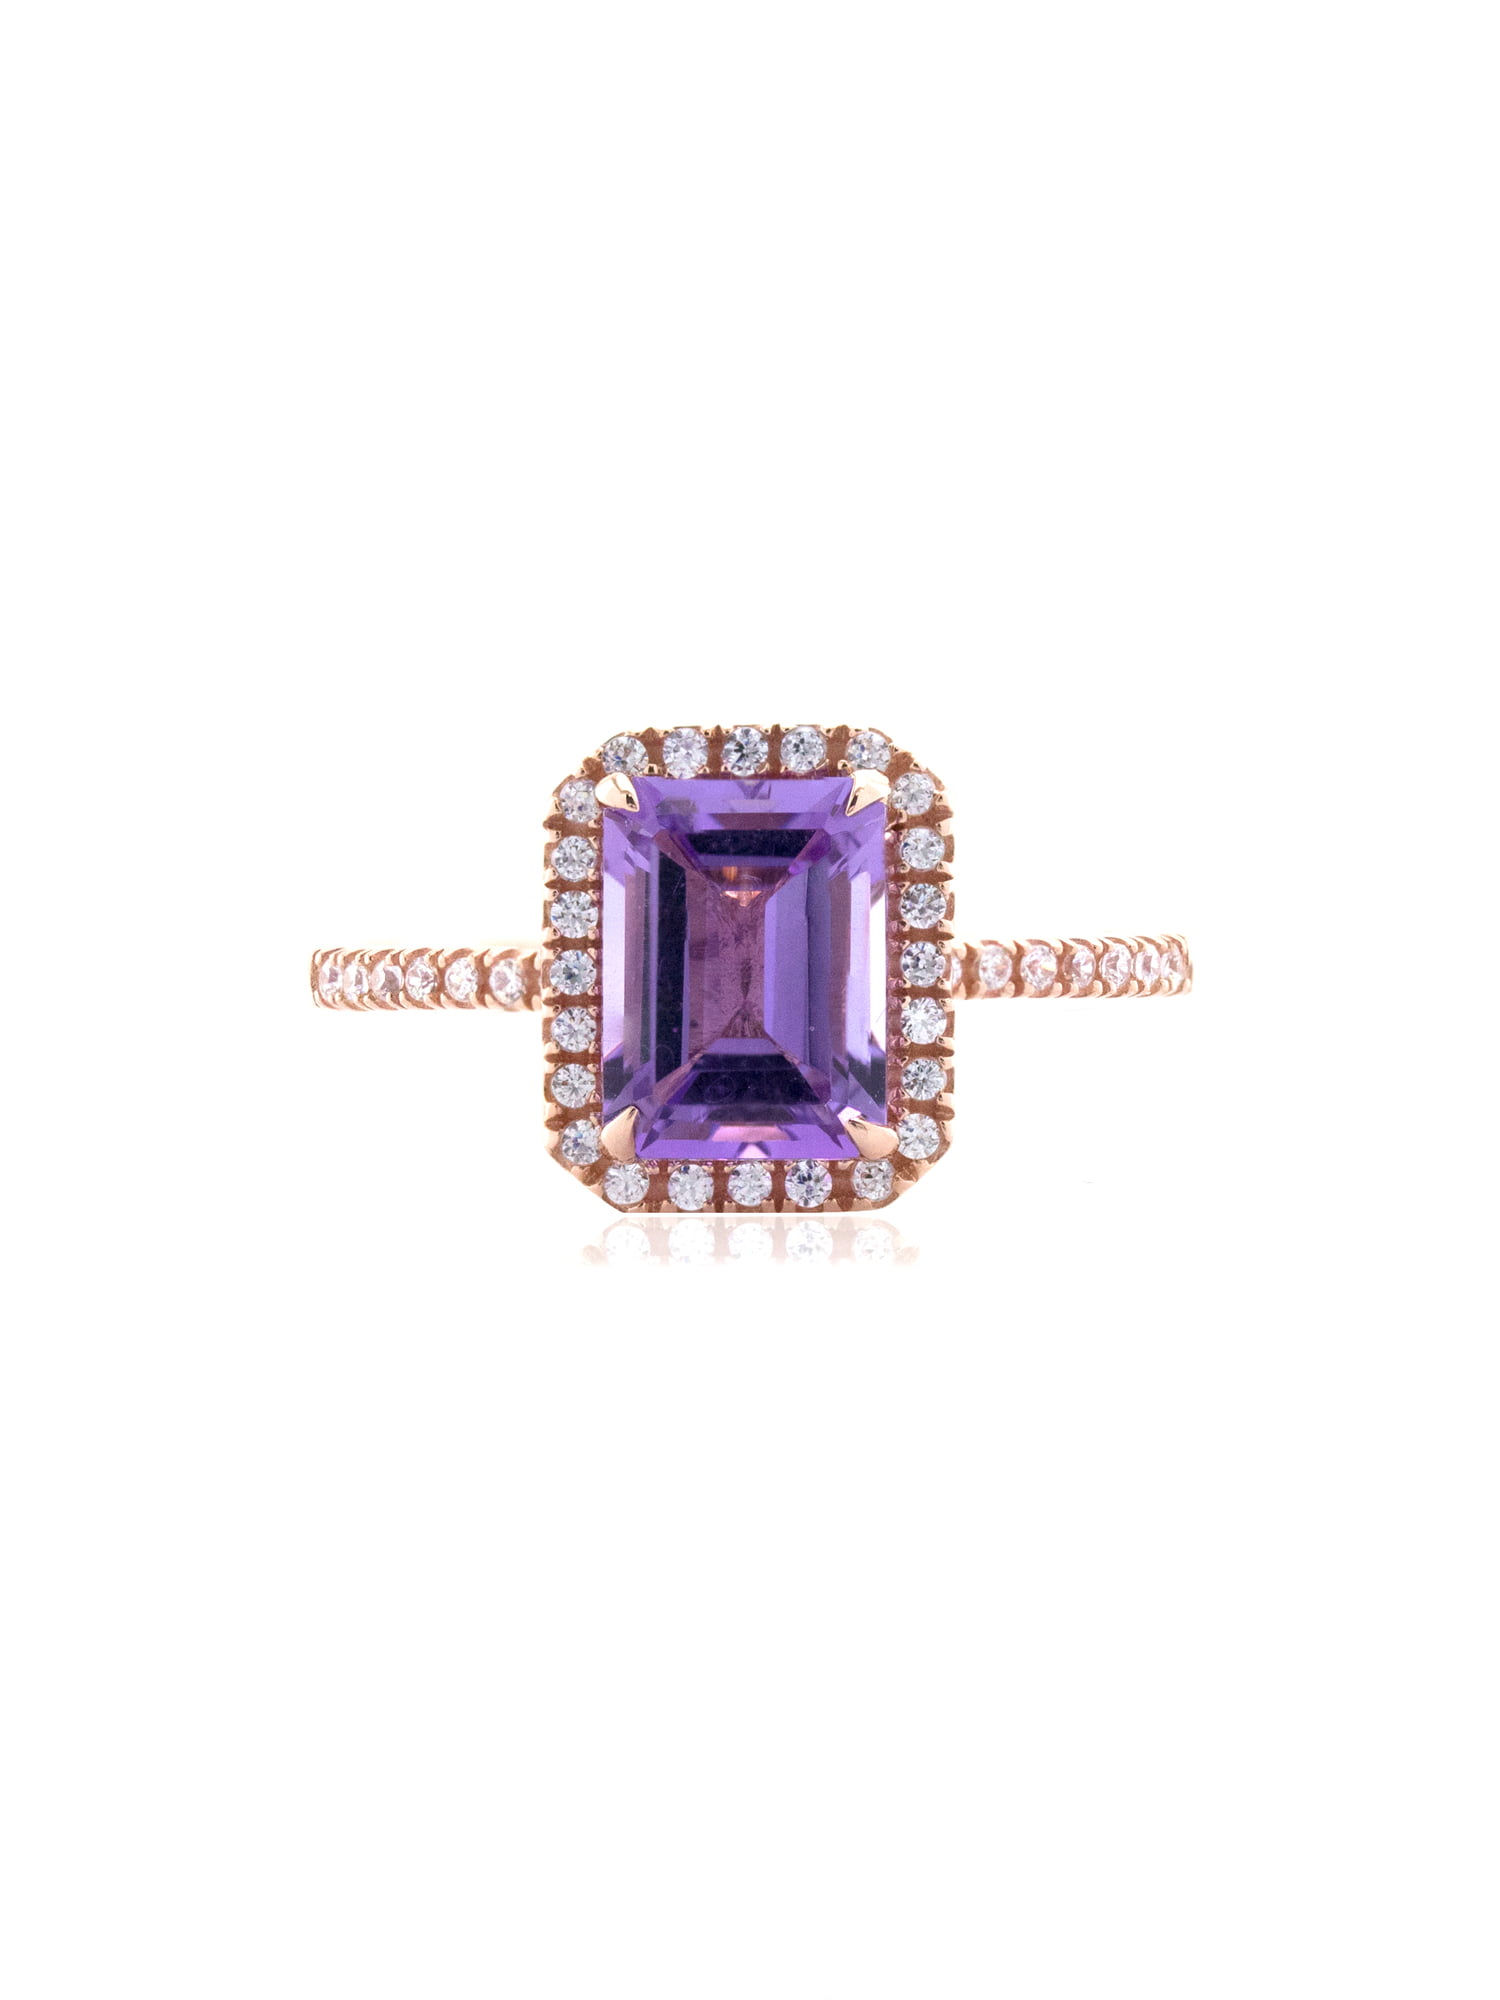 55Carat Real Amethyst Gold Plated Ring for Women February Chakra Healing Bezel Oval Shape Size 5,6,7,8,9,10,11,12 